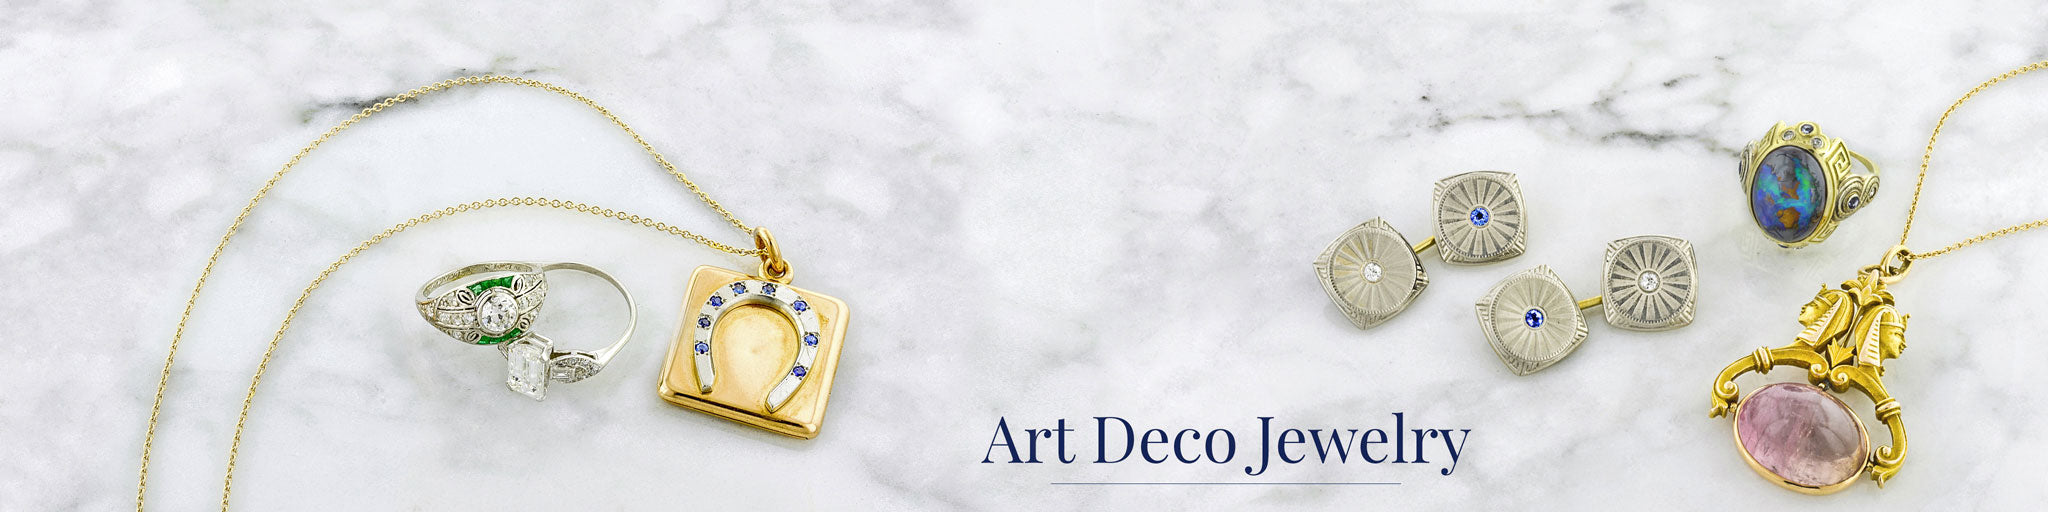 Art Deco Jewelry | Vintage Art Deco Rings, Necklaces, And Earrings